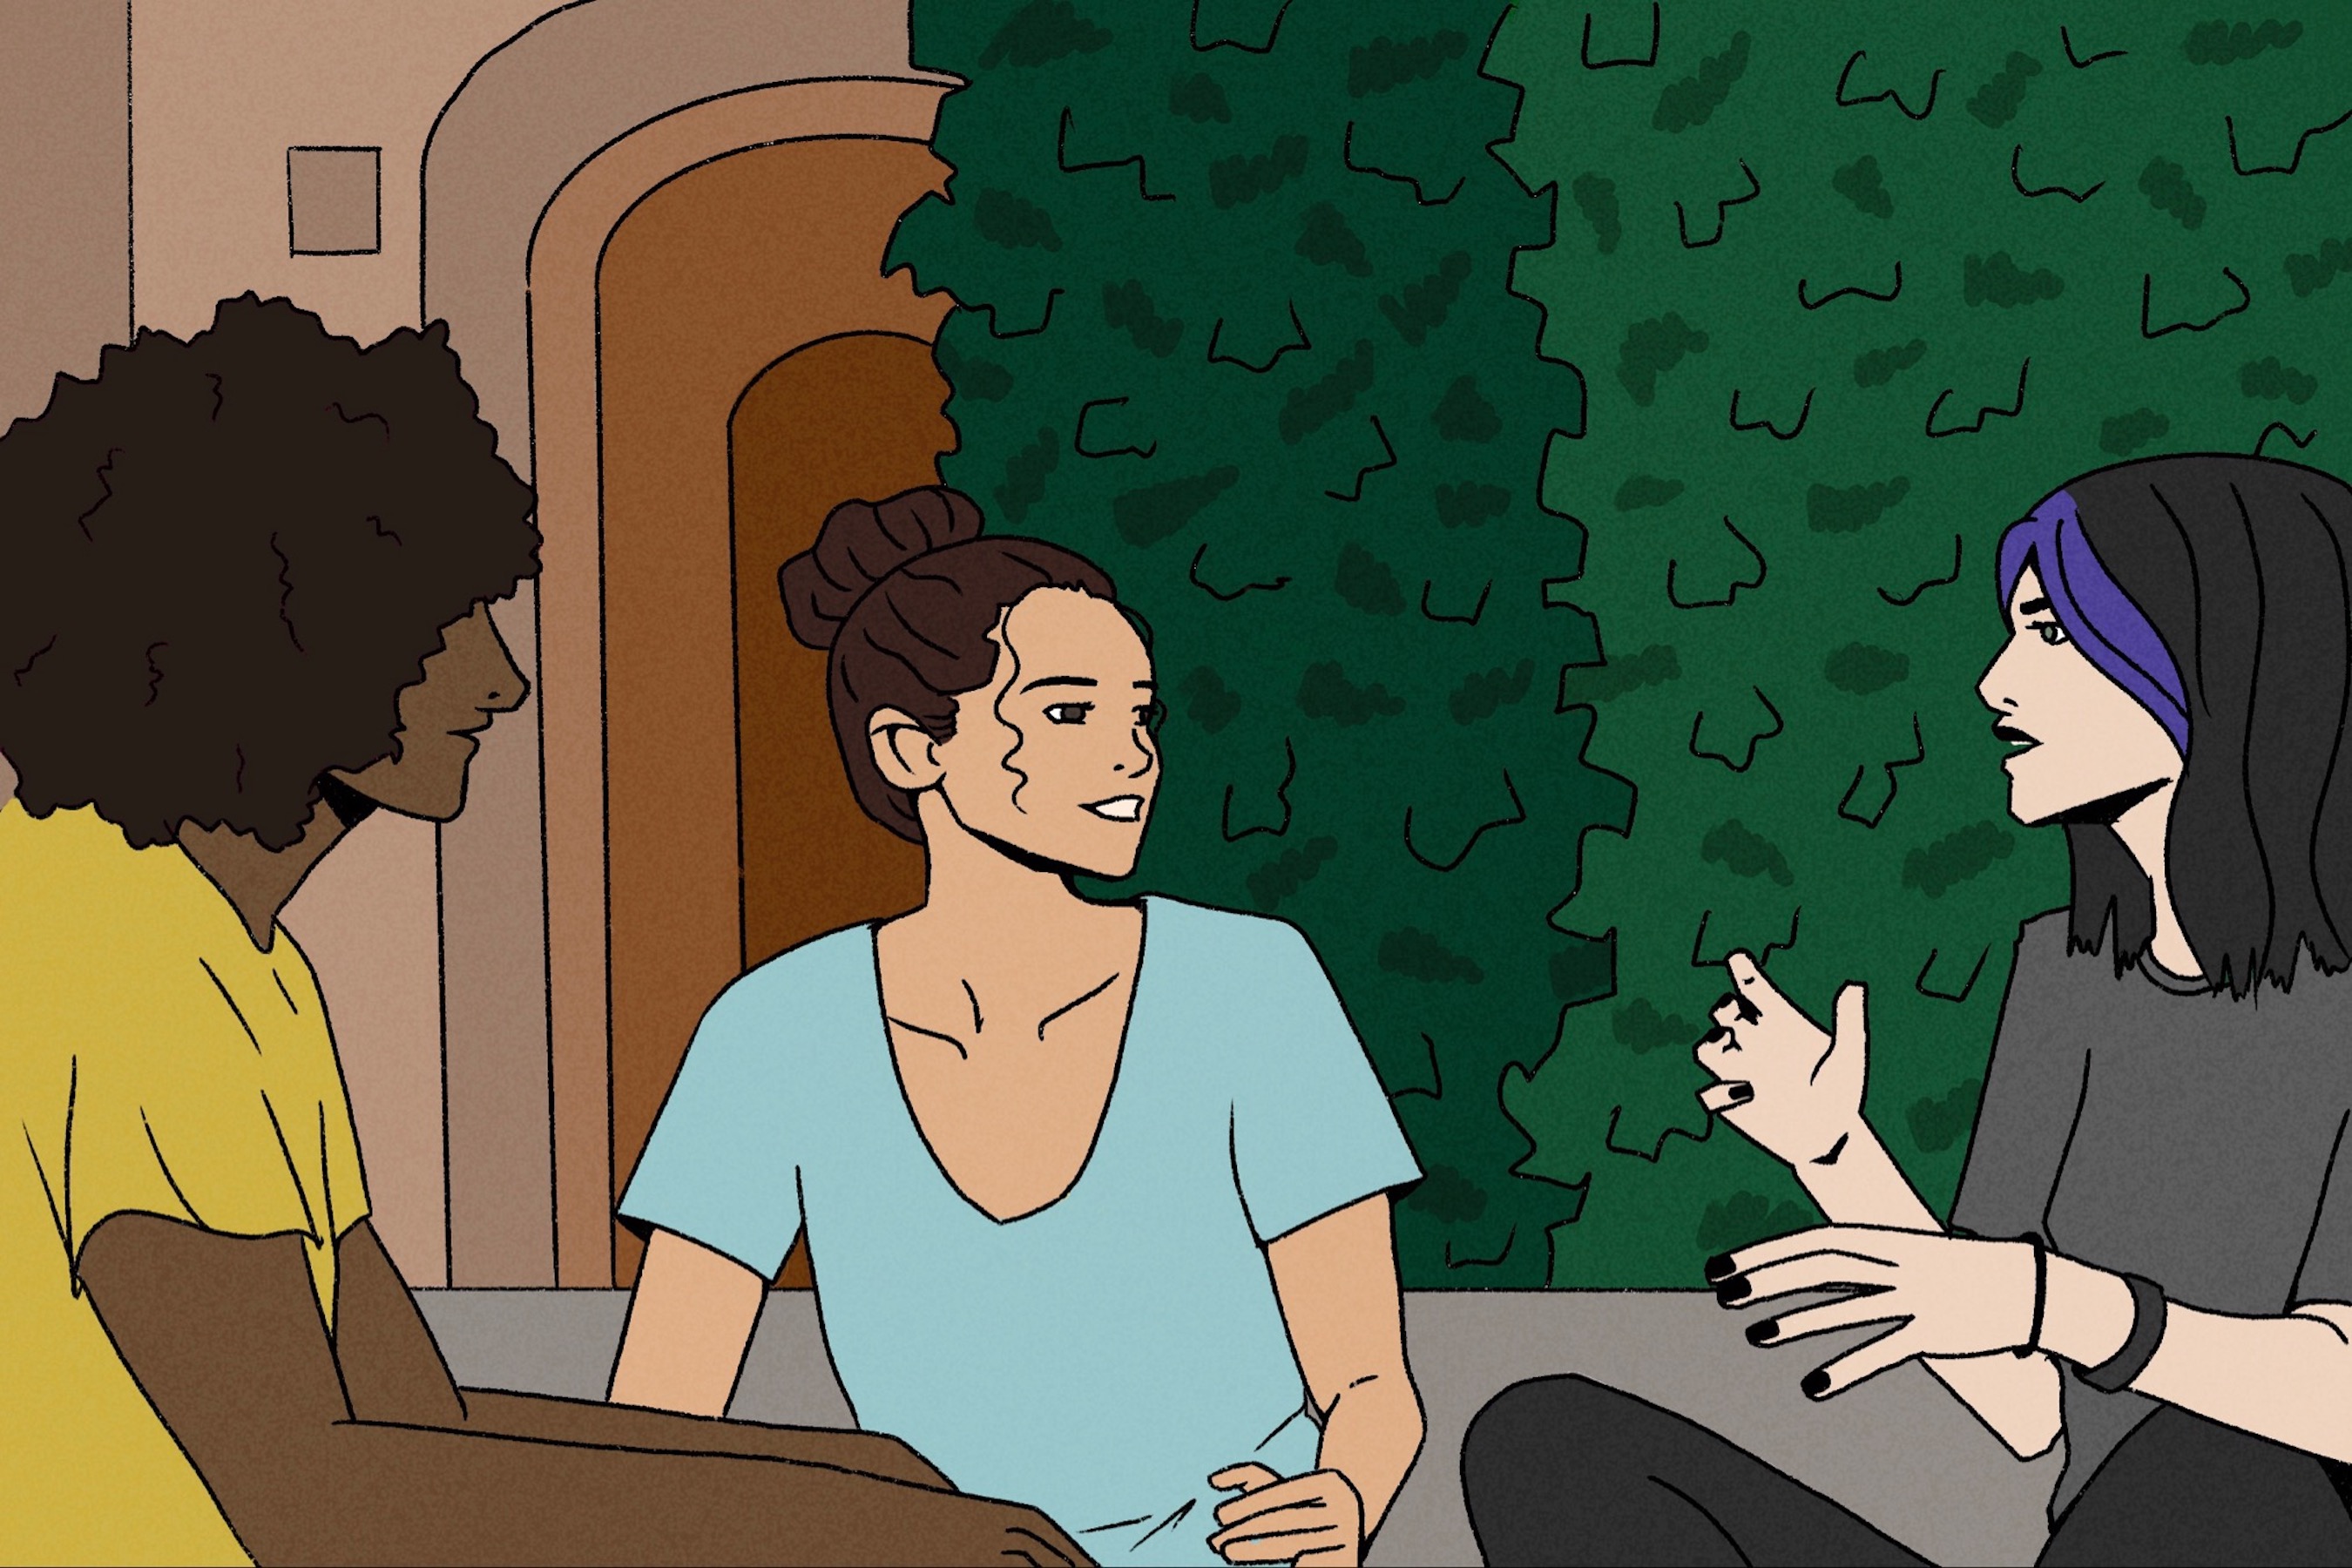 Image show a flat-style illustration of three women sitting outside on the steps in front of a brick building in the middle of a conversation.